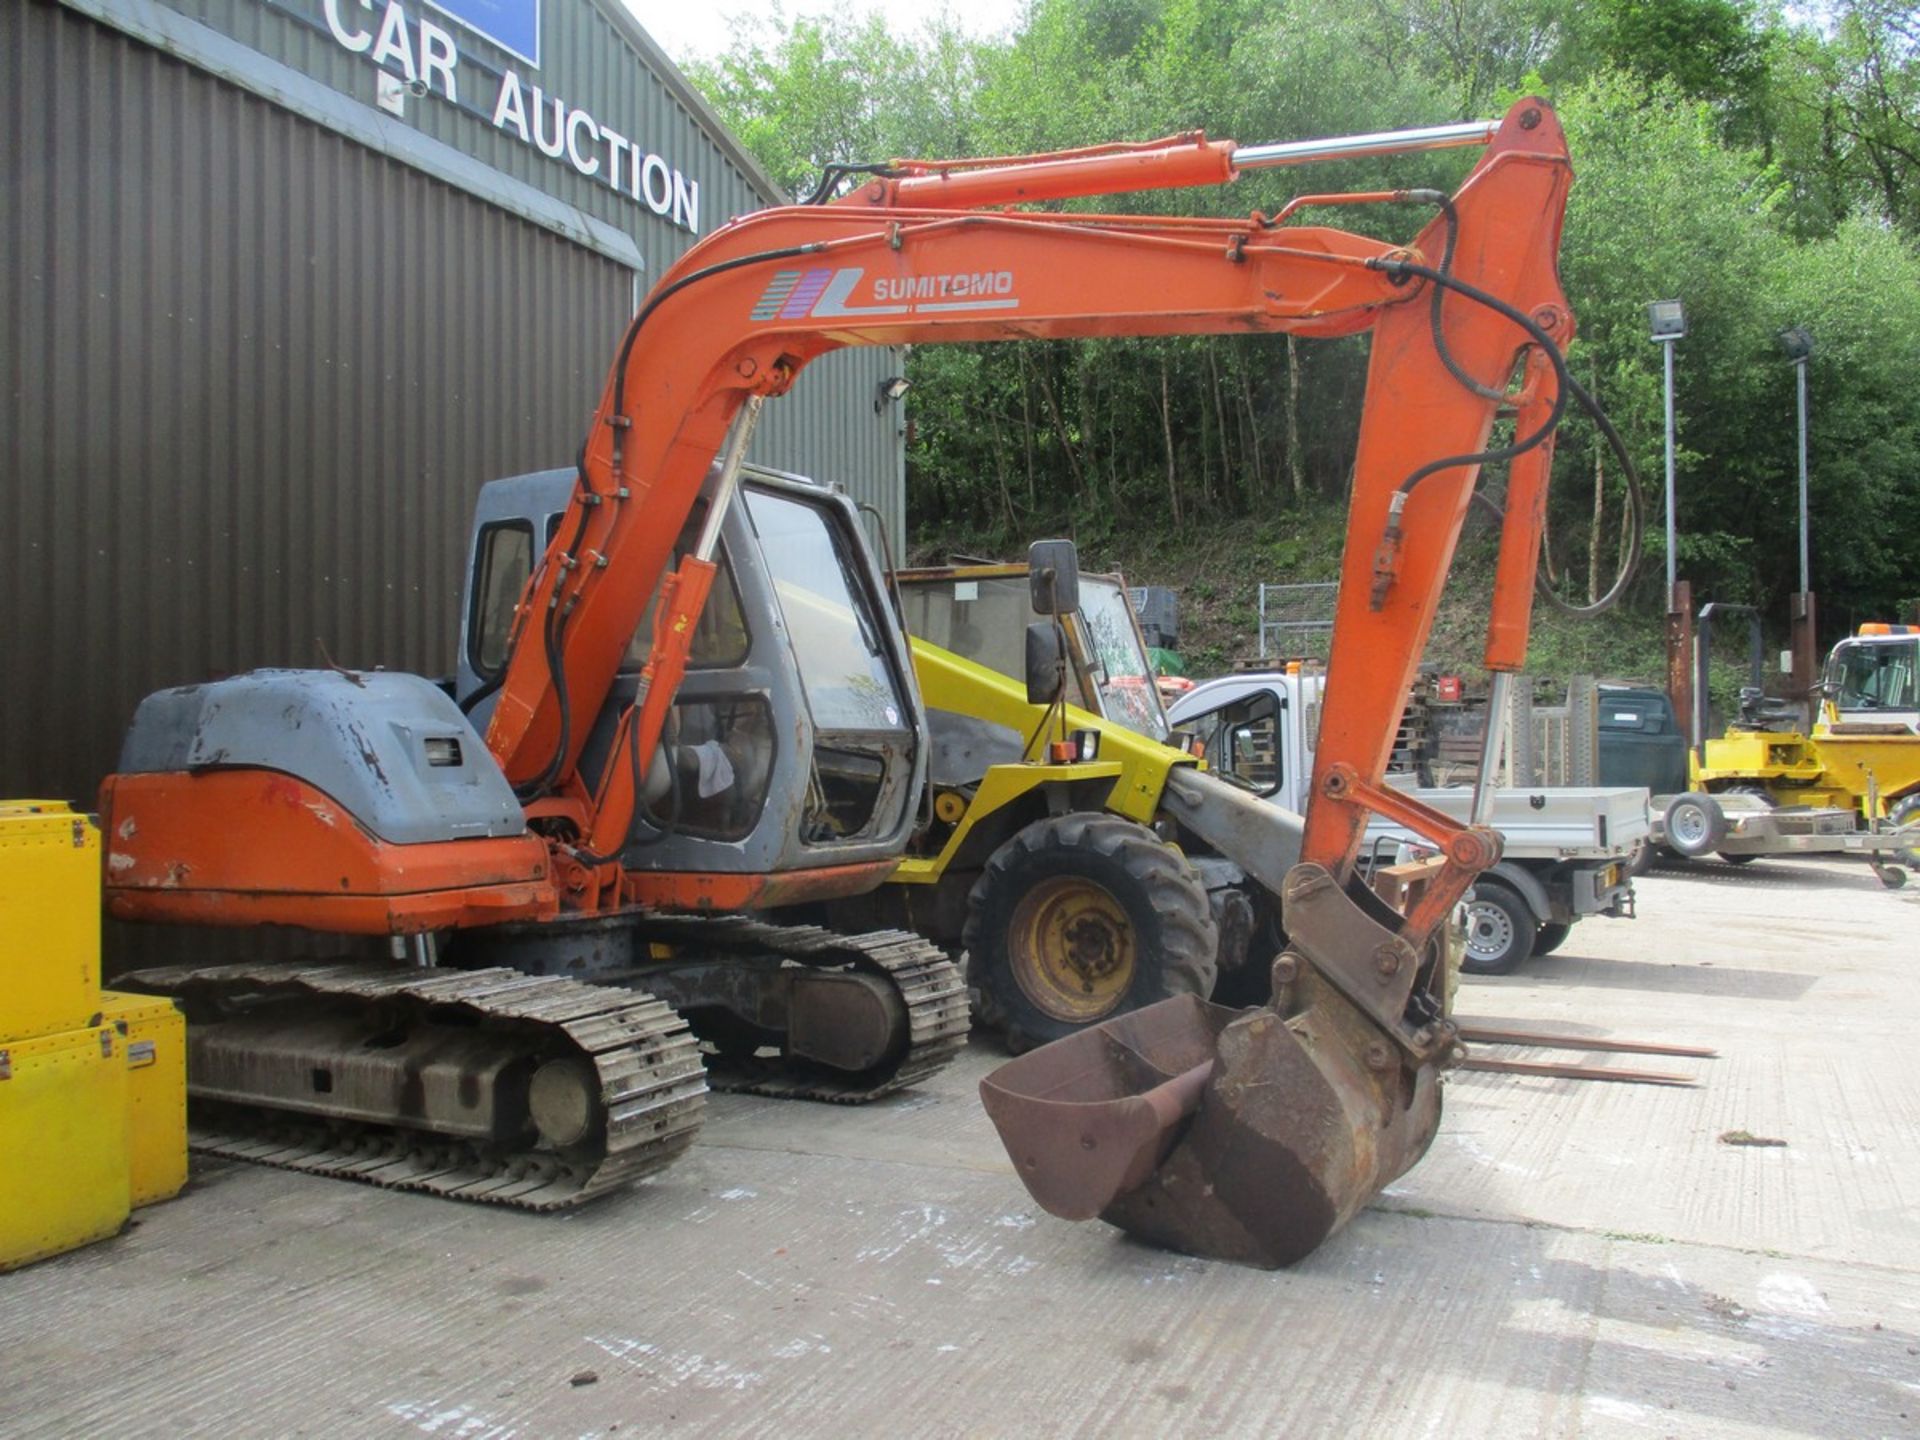 SUMITOMO 7 TON EXCAVATOR C.W 2 BUCKETS SHOWING 5635HRS - Image 2 of 11